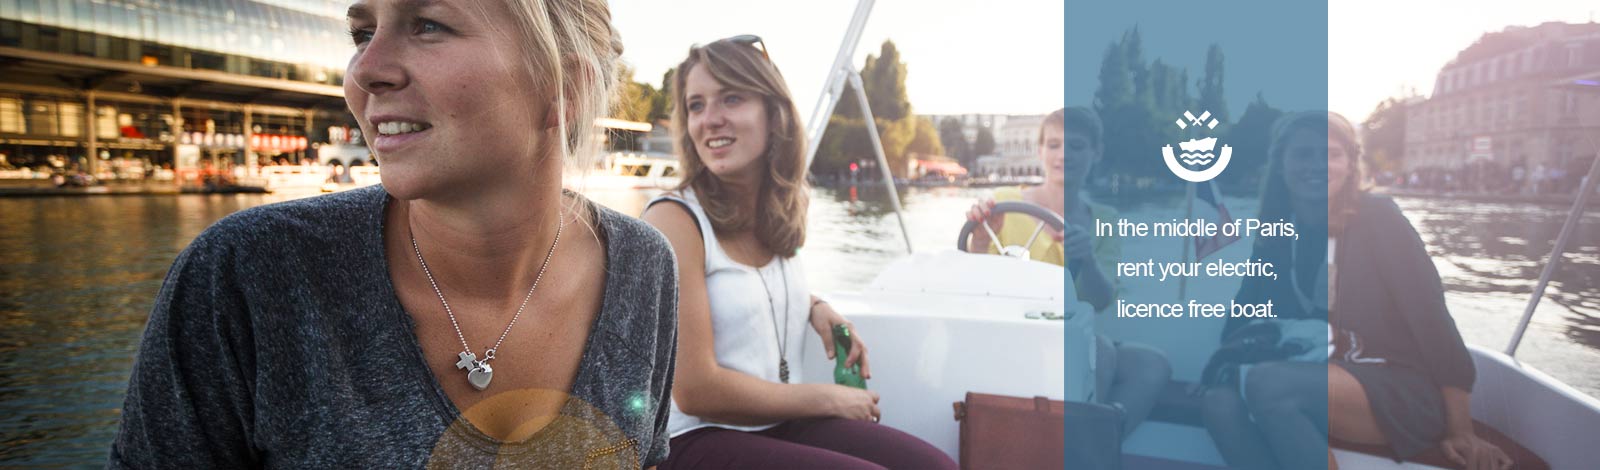 Rent a licence free boat to celebrate a hen party